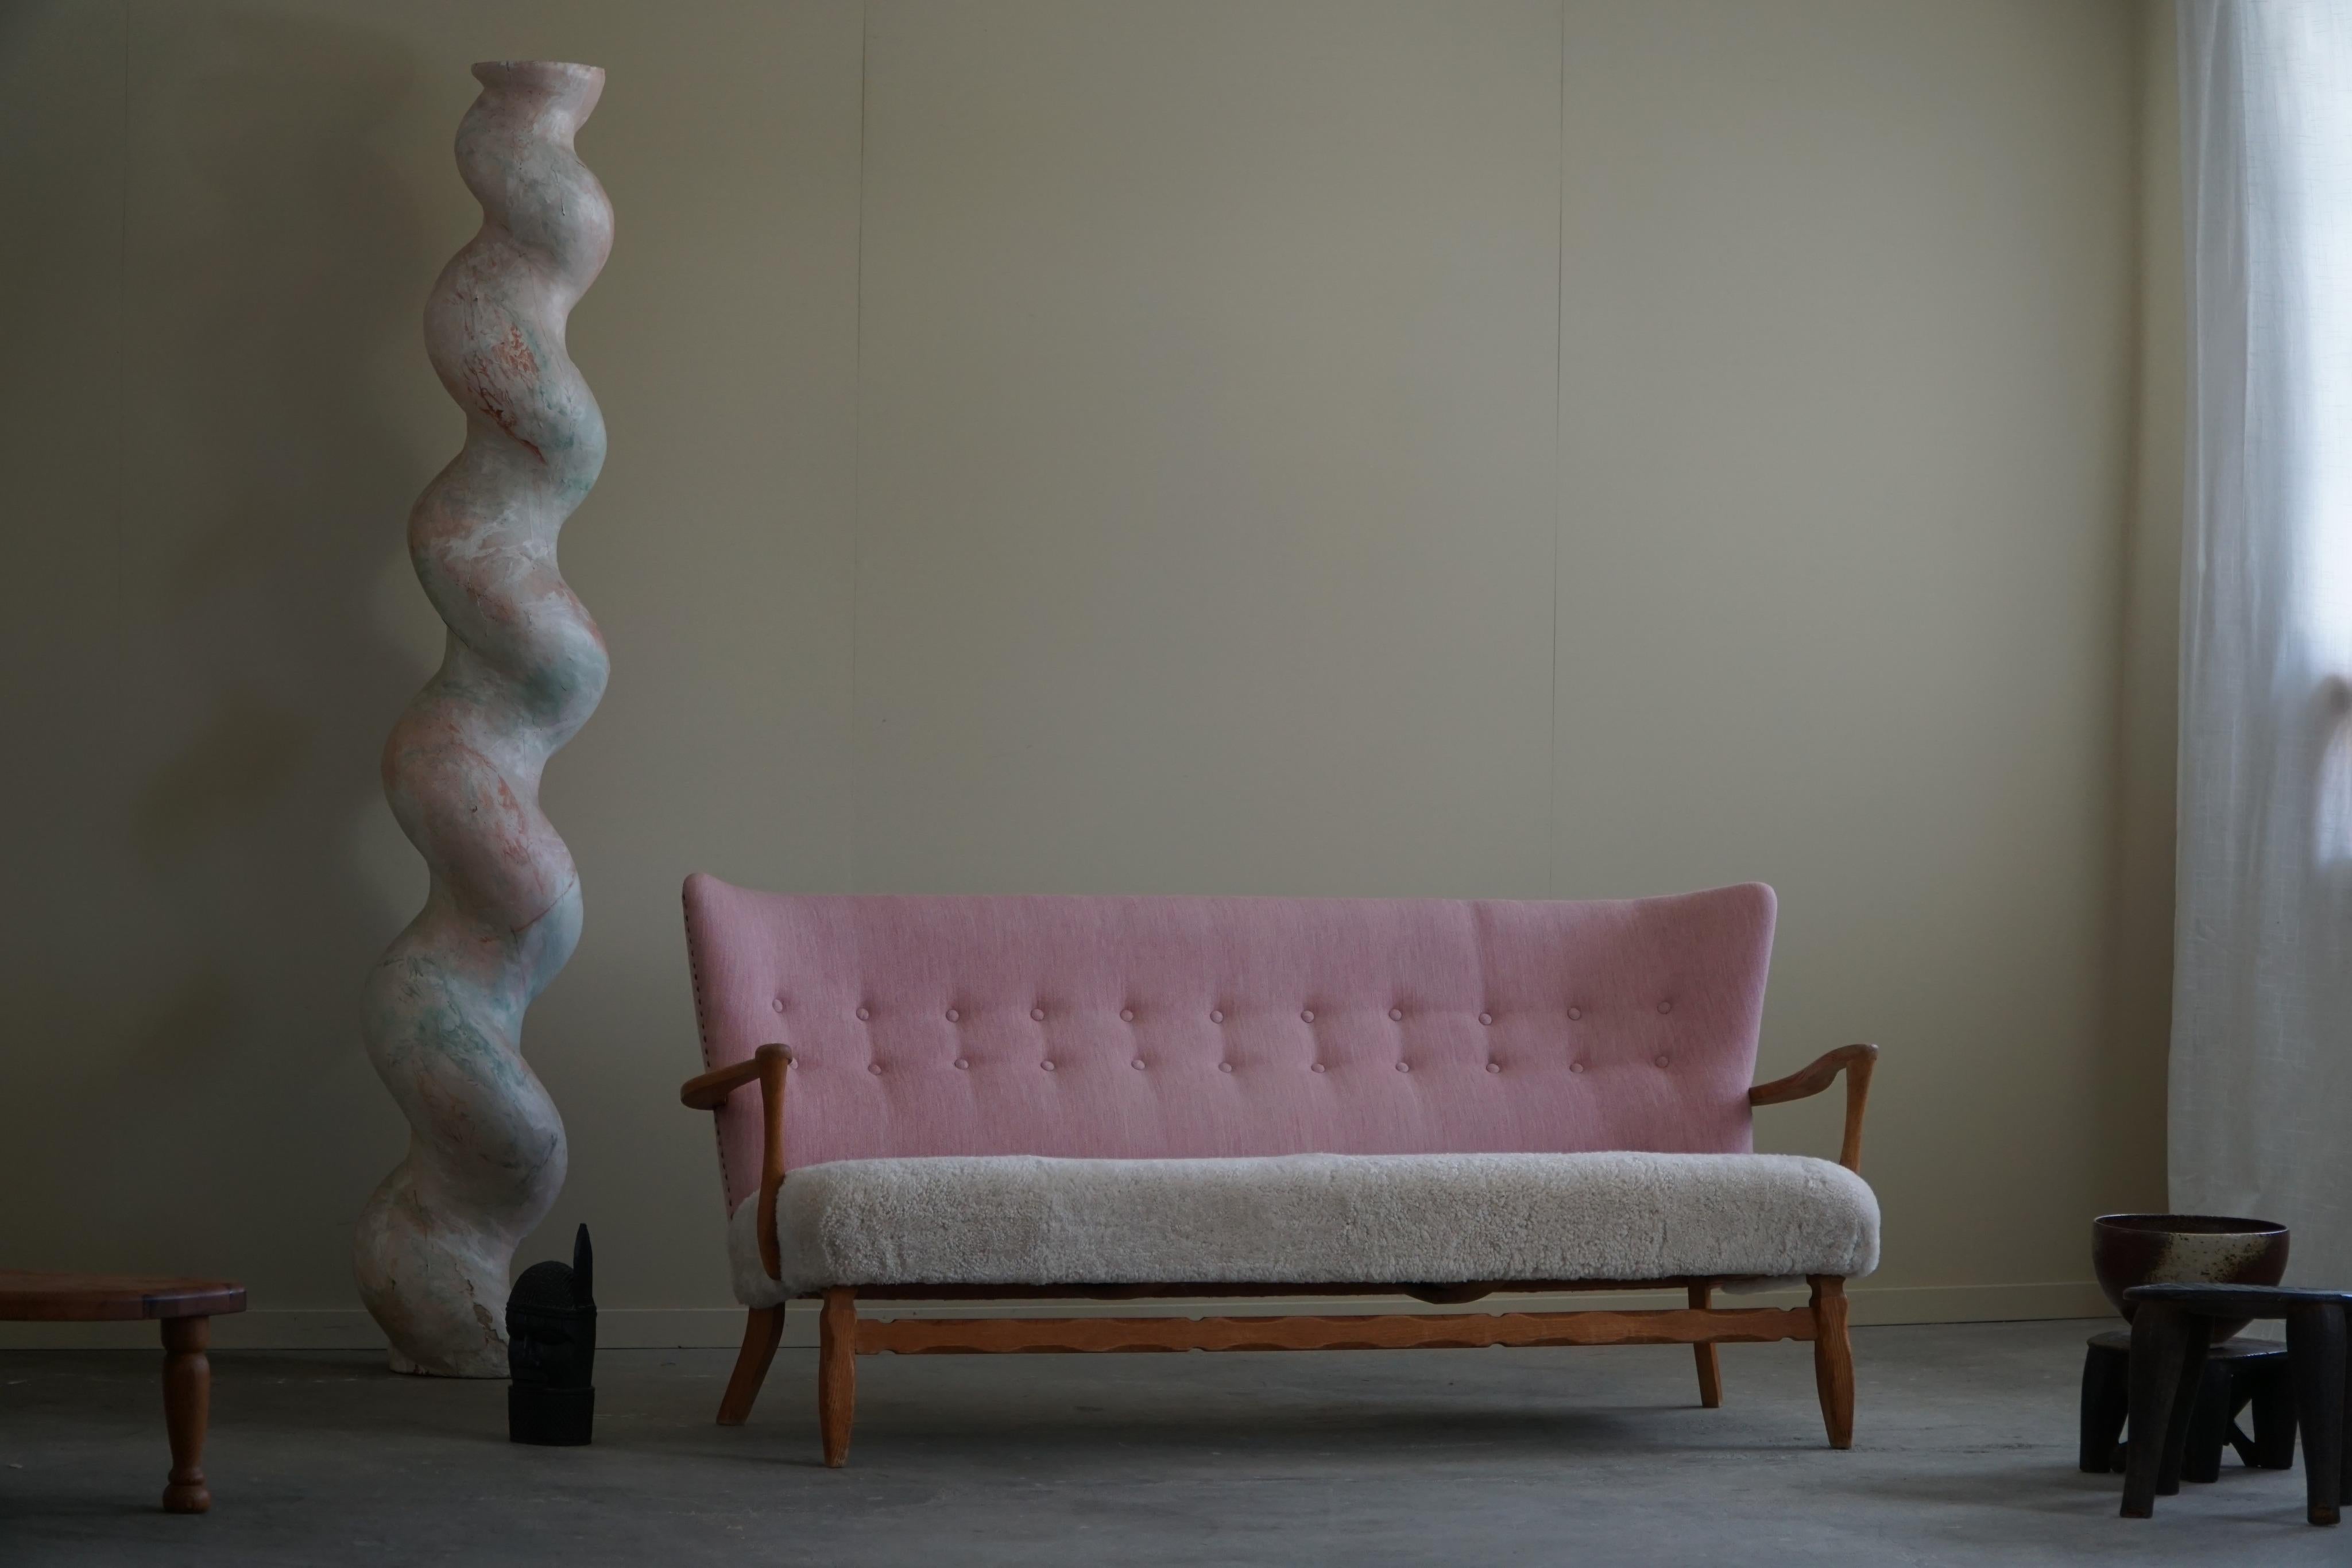 A fine example of a Danish modern sofa in solid oak, reupholstered seats in great quality shearling lambswool, the backrest upholstered in a original pink fabric. Made in the manner of Danish Architect Viggo Boesen in the 1960s. This exquisite sofa